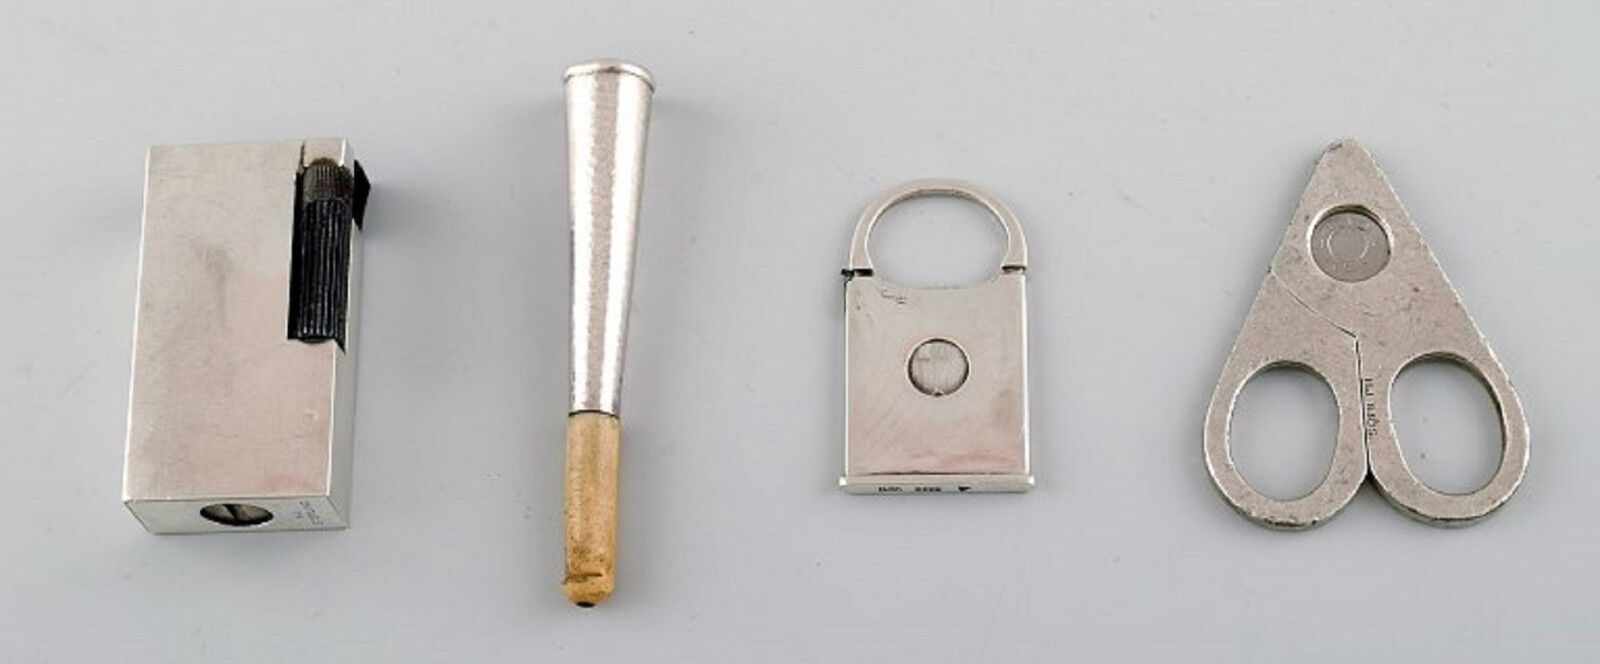 Four pieces Danish silver. Lighter, cigarette holder and two cigar clippers.